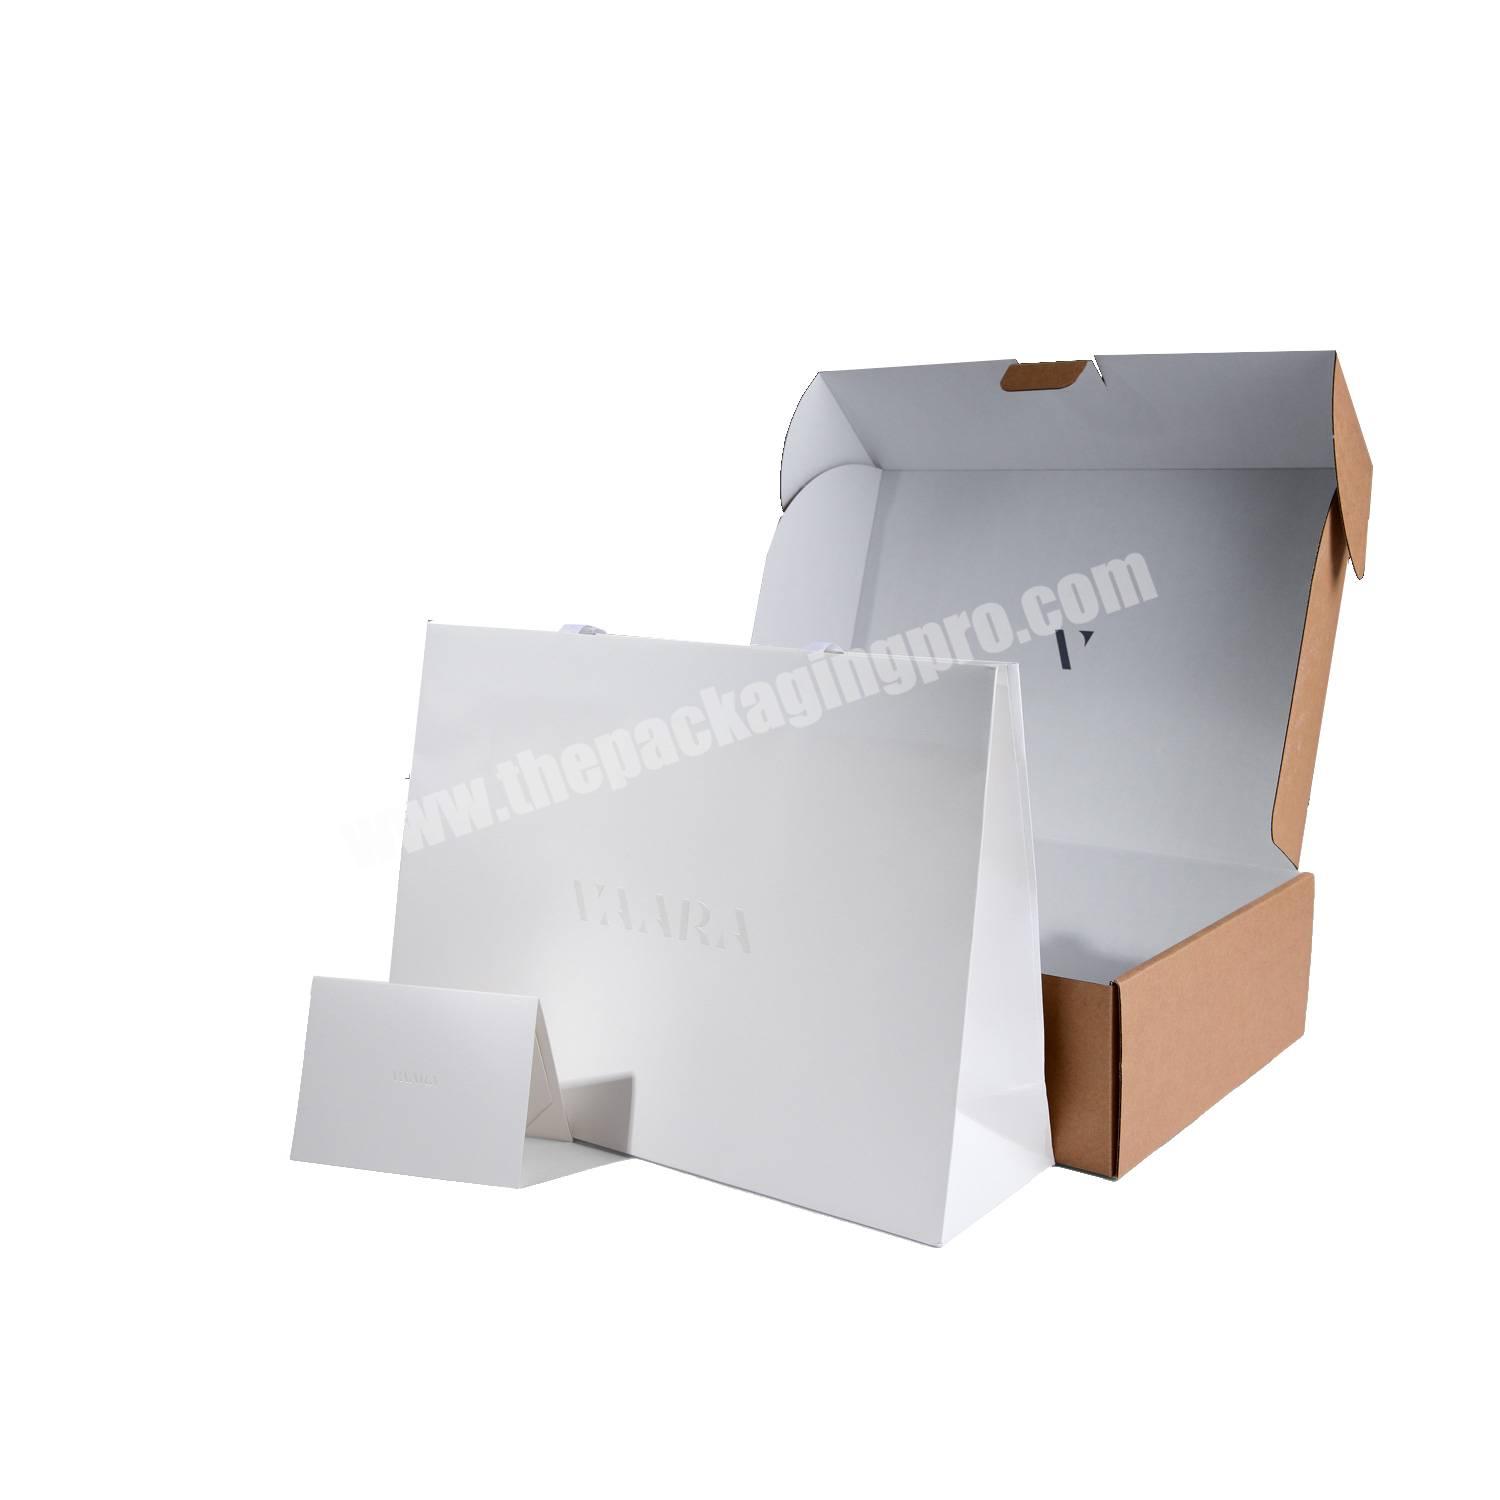 Supply Reasonable Price Cosmetics Whole Set Package Magnetic Box Custom Cosmetic Mailer Box Packaging Bags